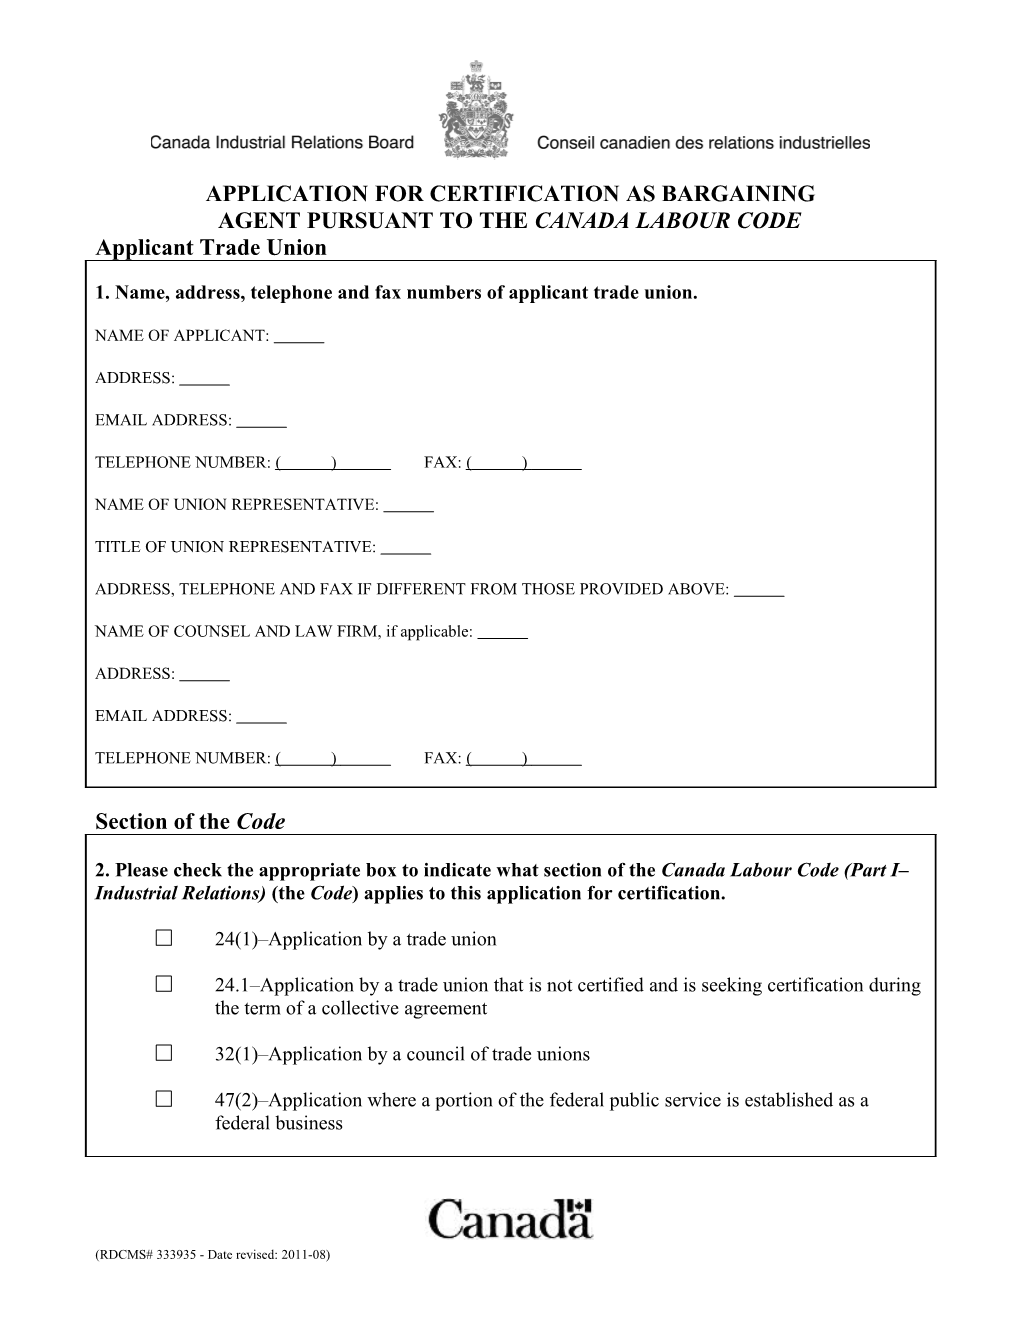 Application for Certificationas Bargaining Agent Pursuantto the Canada Labour Code